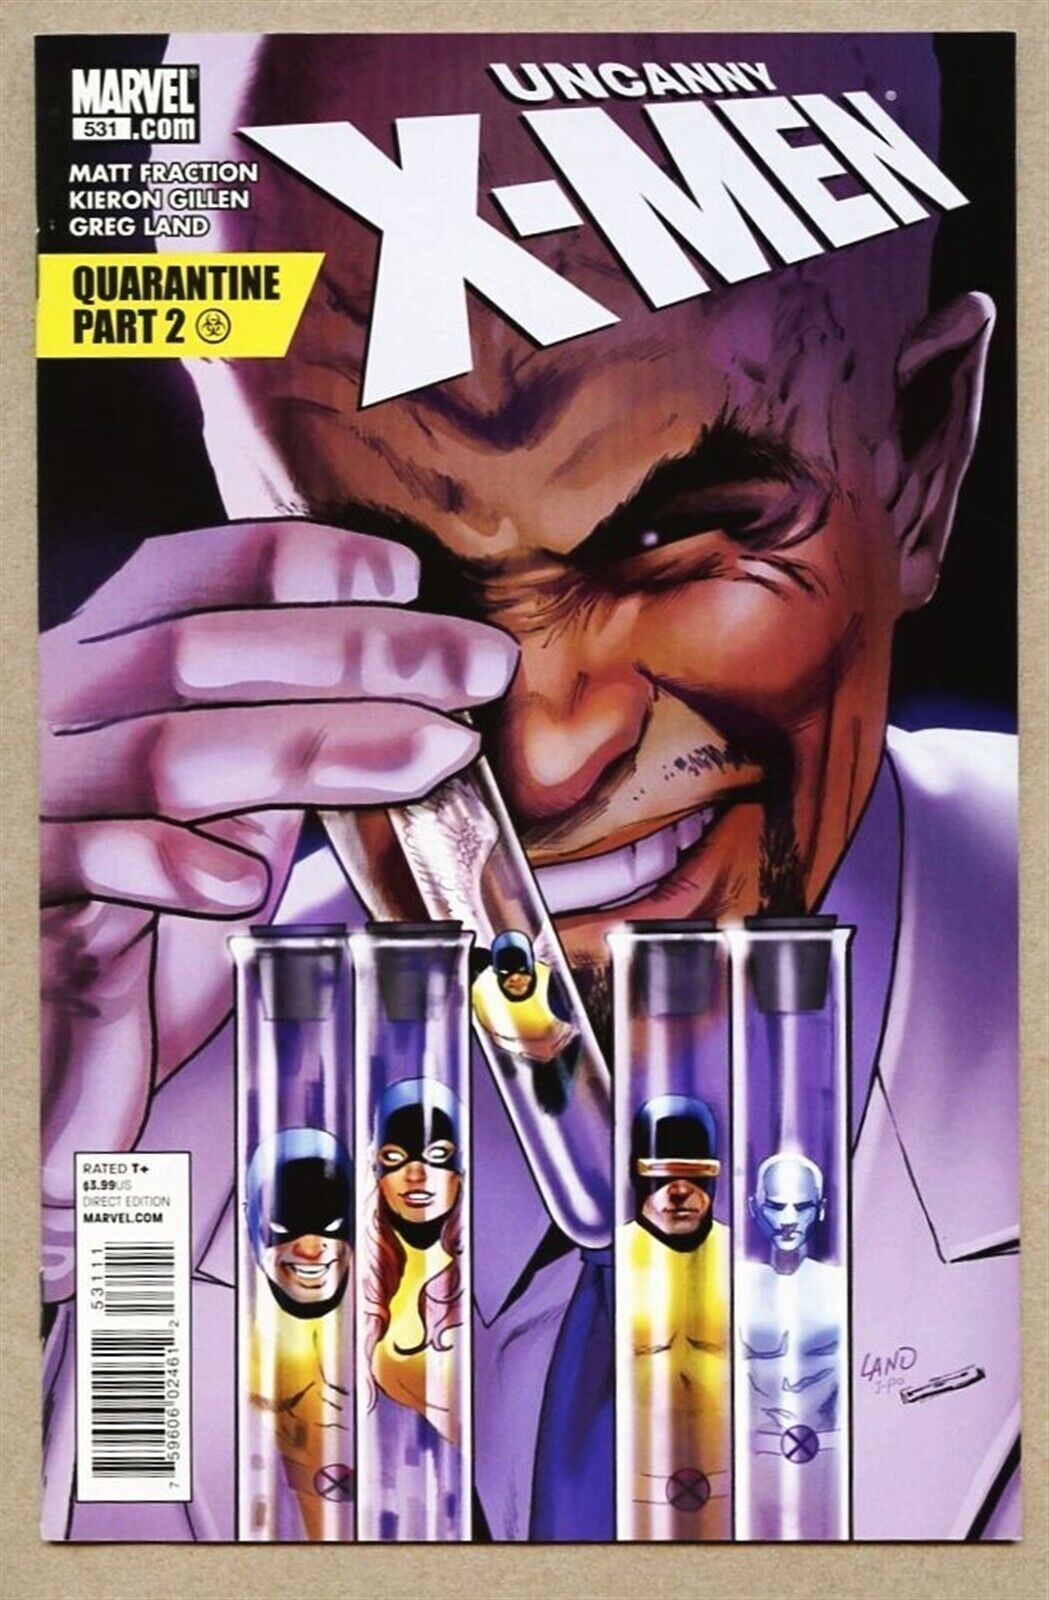 Uncanny X-Men #531-2011 vf/nm 9.0 this issue had only 1 cover Greg Land  Make BO